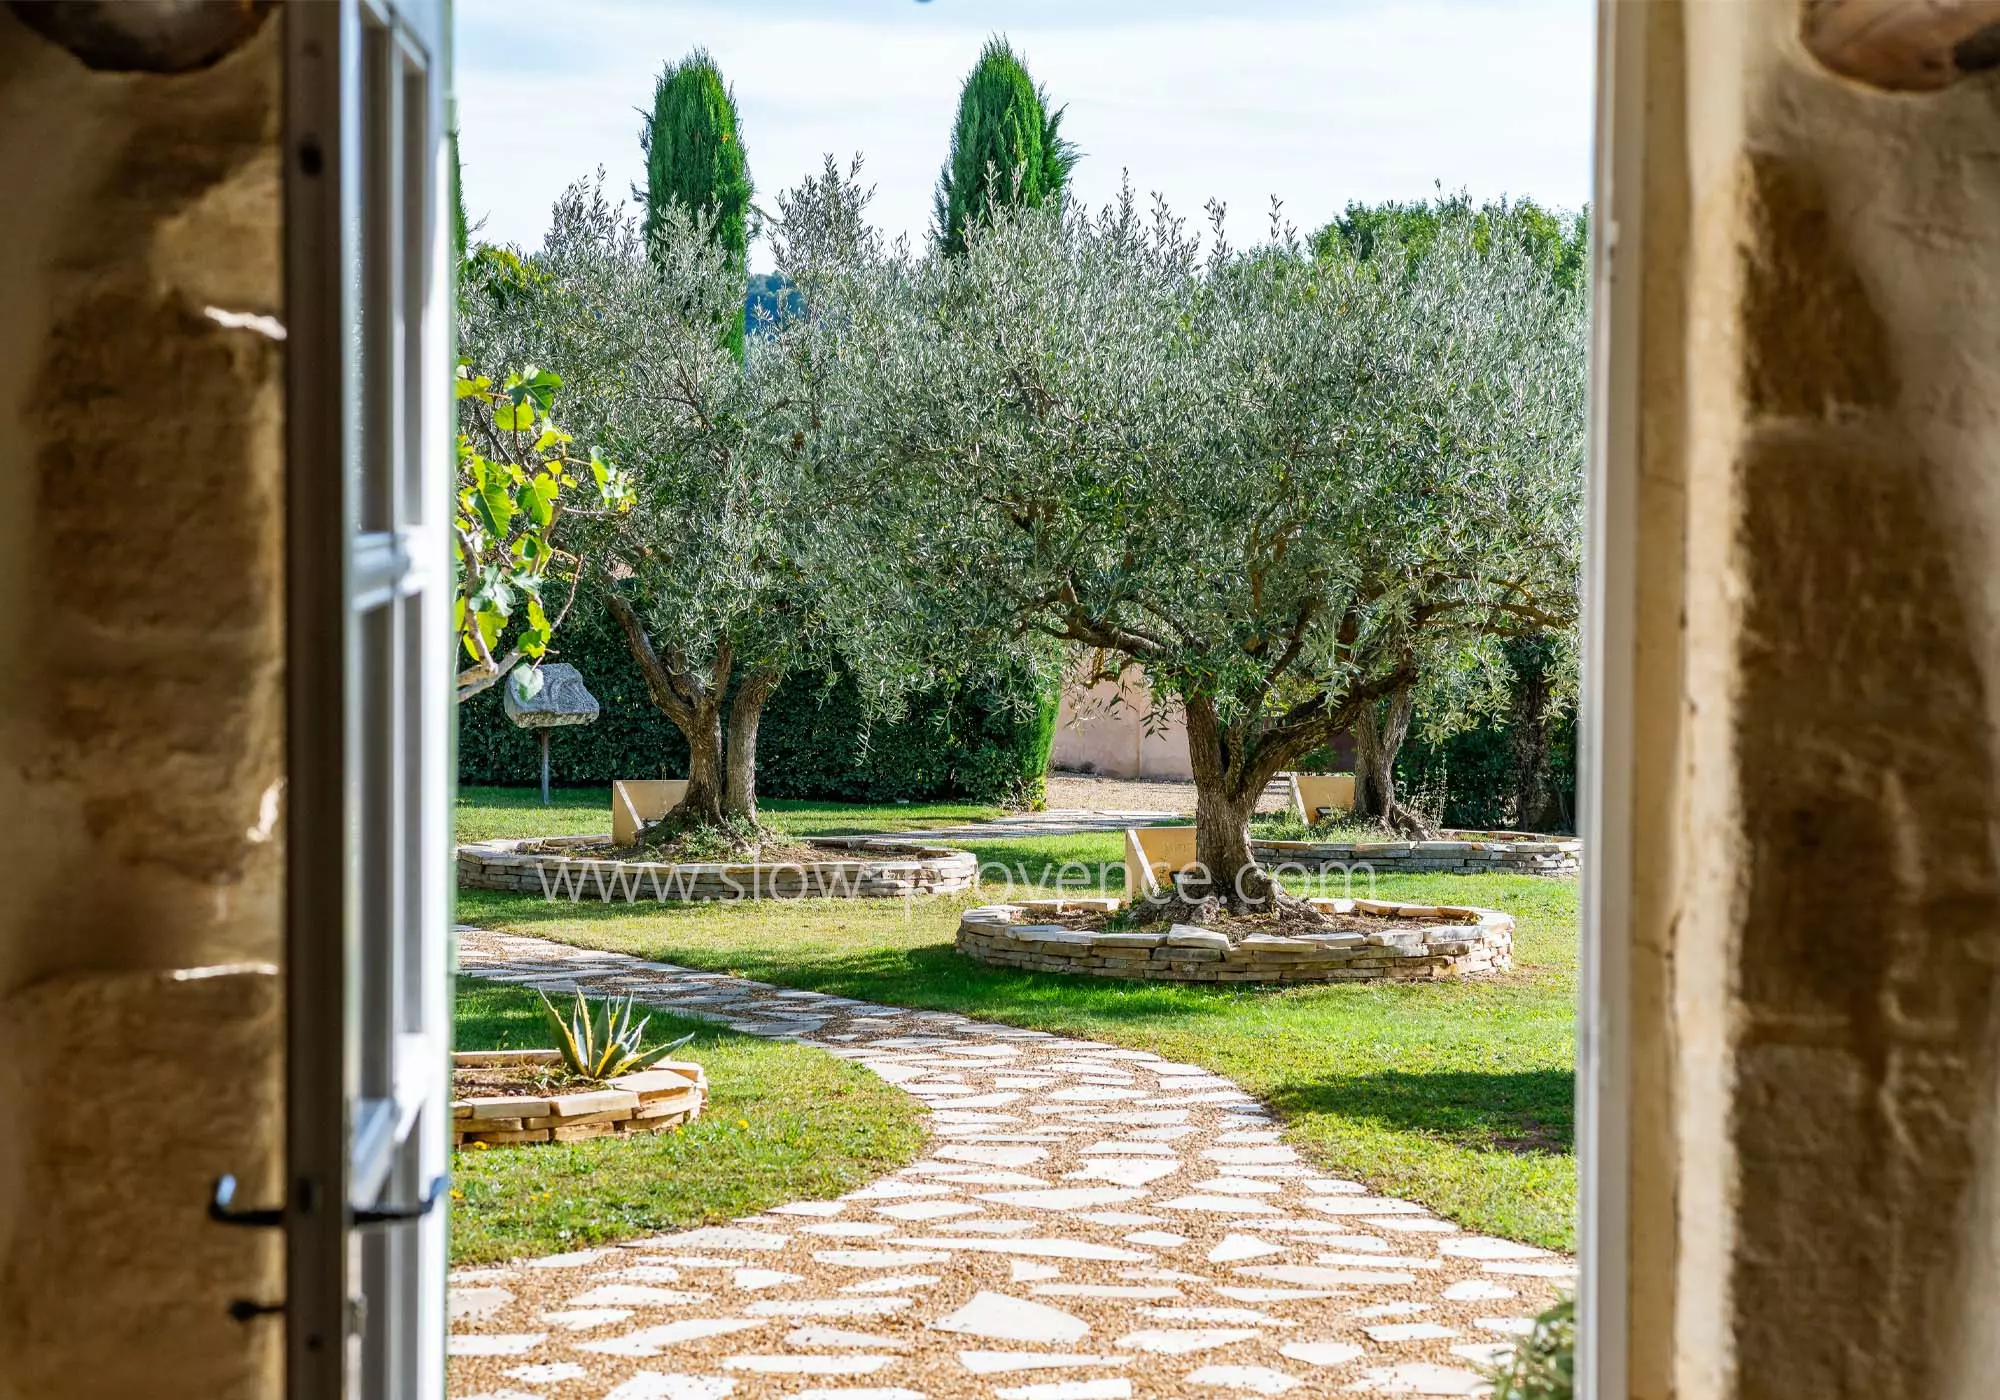 View of the olive trees of the property